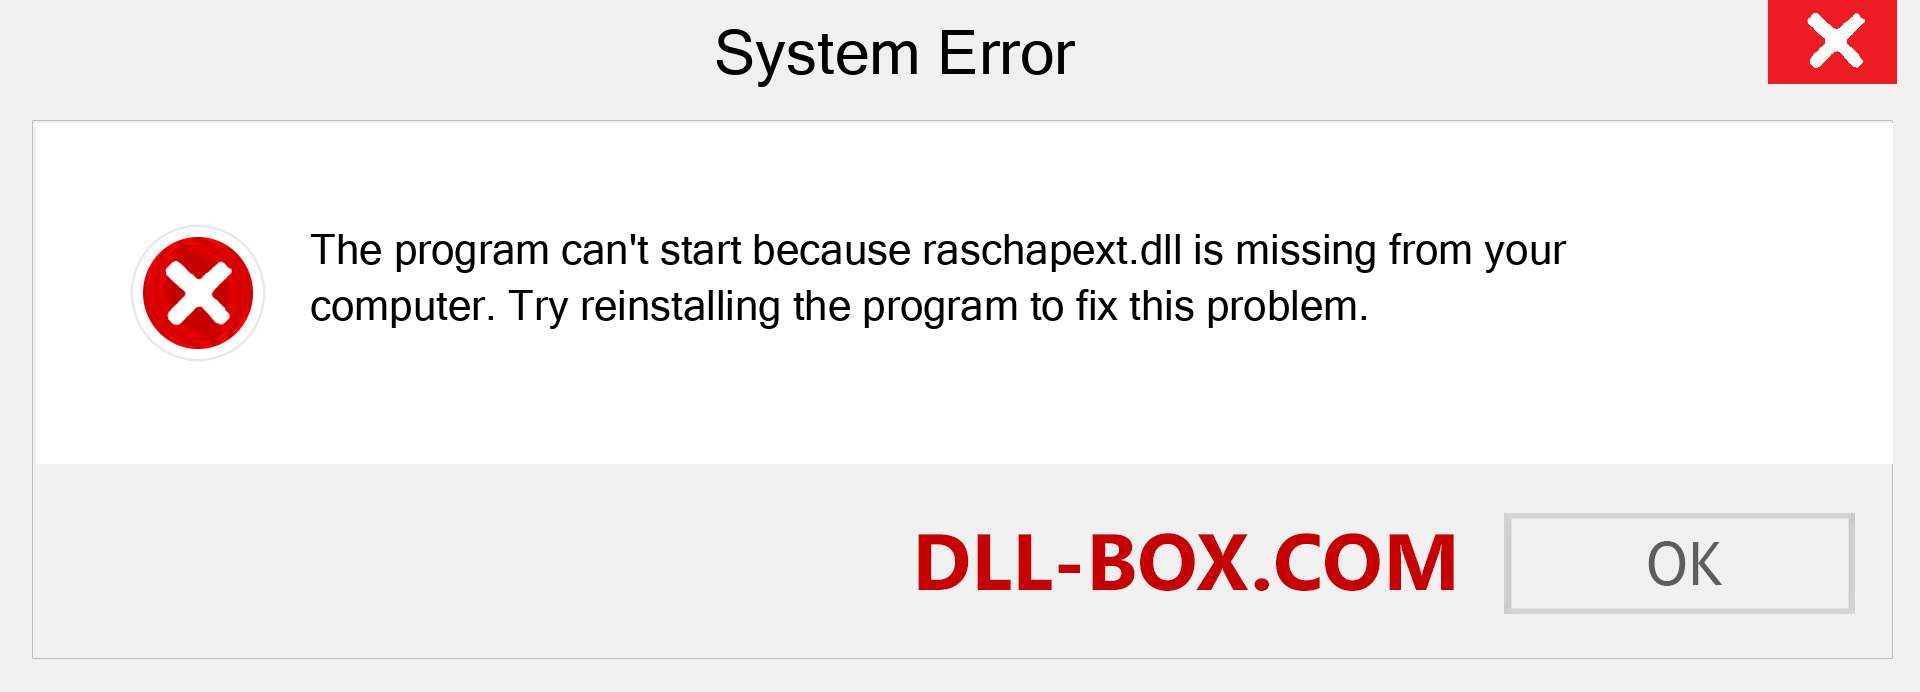  raschapext.dll file is missing?. Download for Windows 7, 8, 10 - Fix  raschapext dll Missing Error on Windows, photos, images